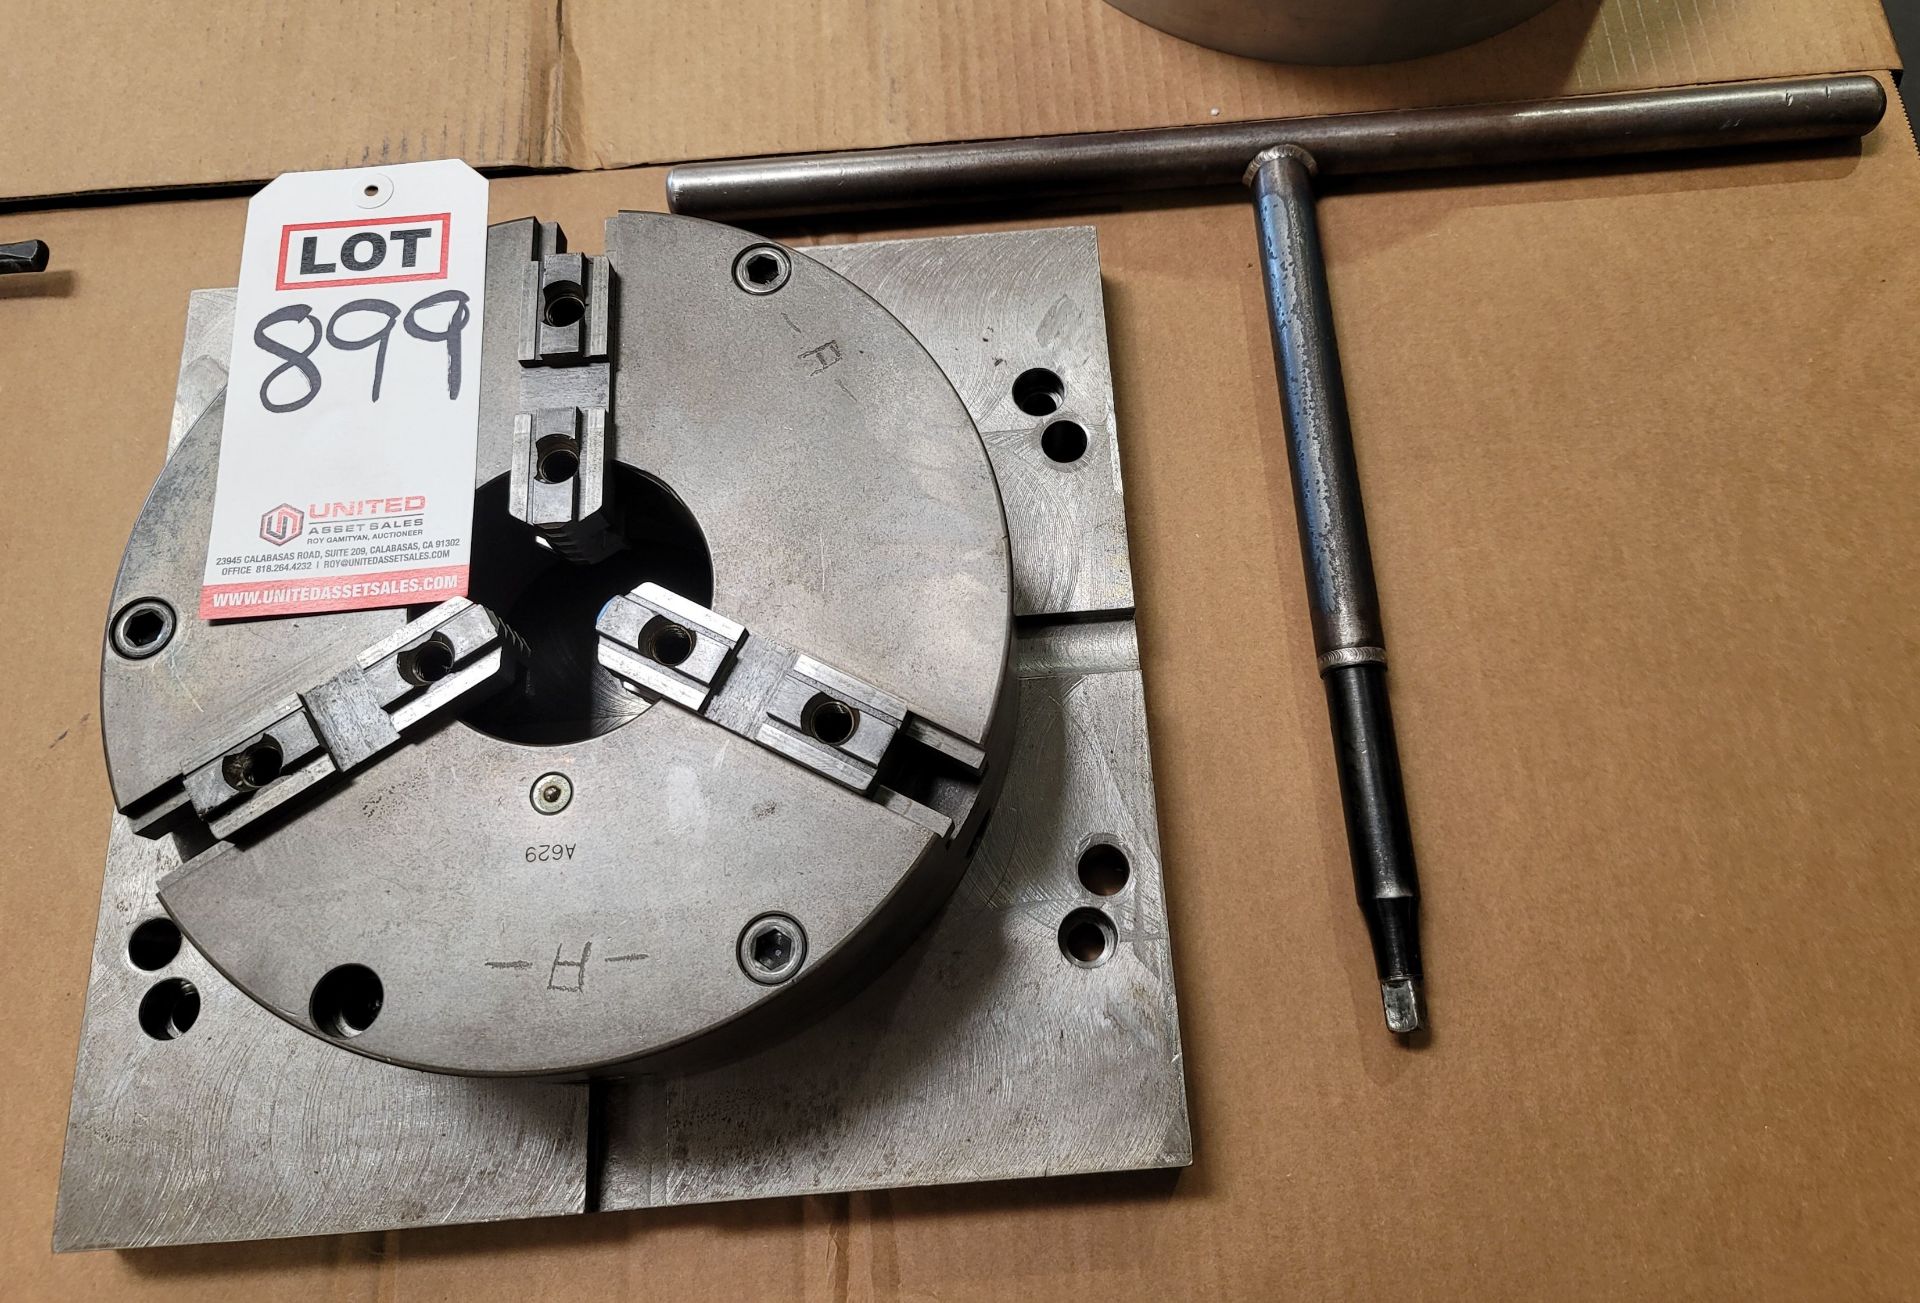 11" 3-JAW CHUCK MOUNTED TO STEEL SUB PLATE FOR THE MAKINO MACHINES